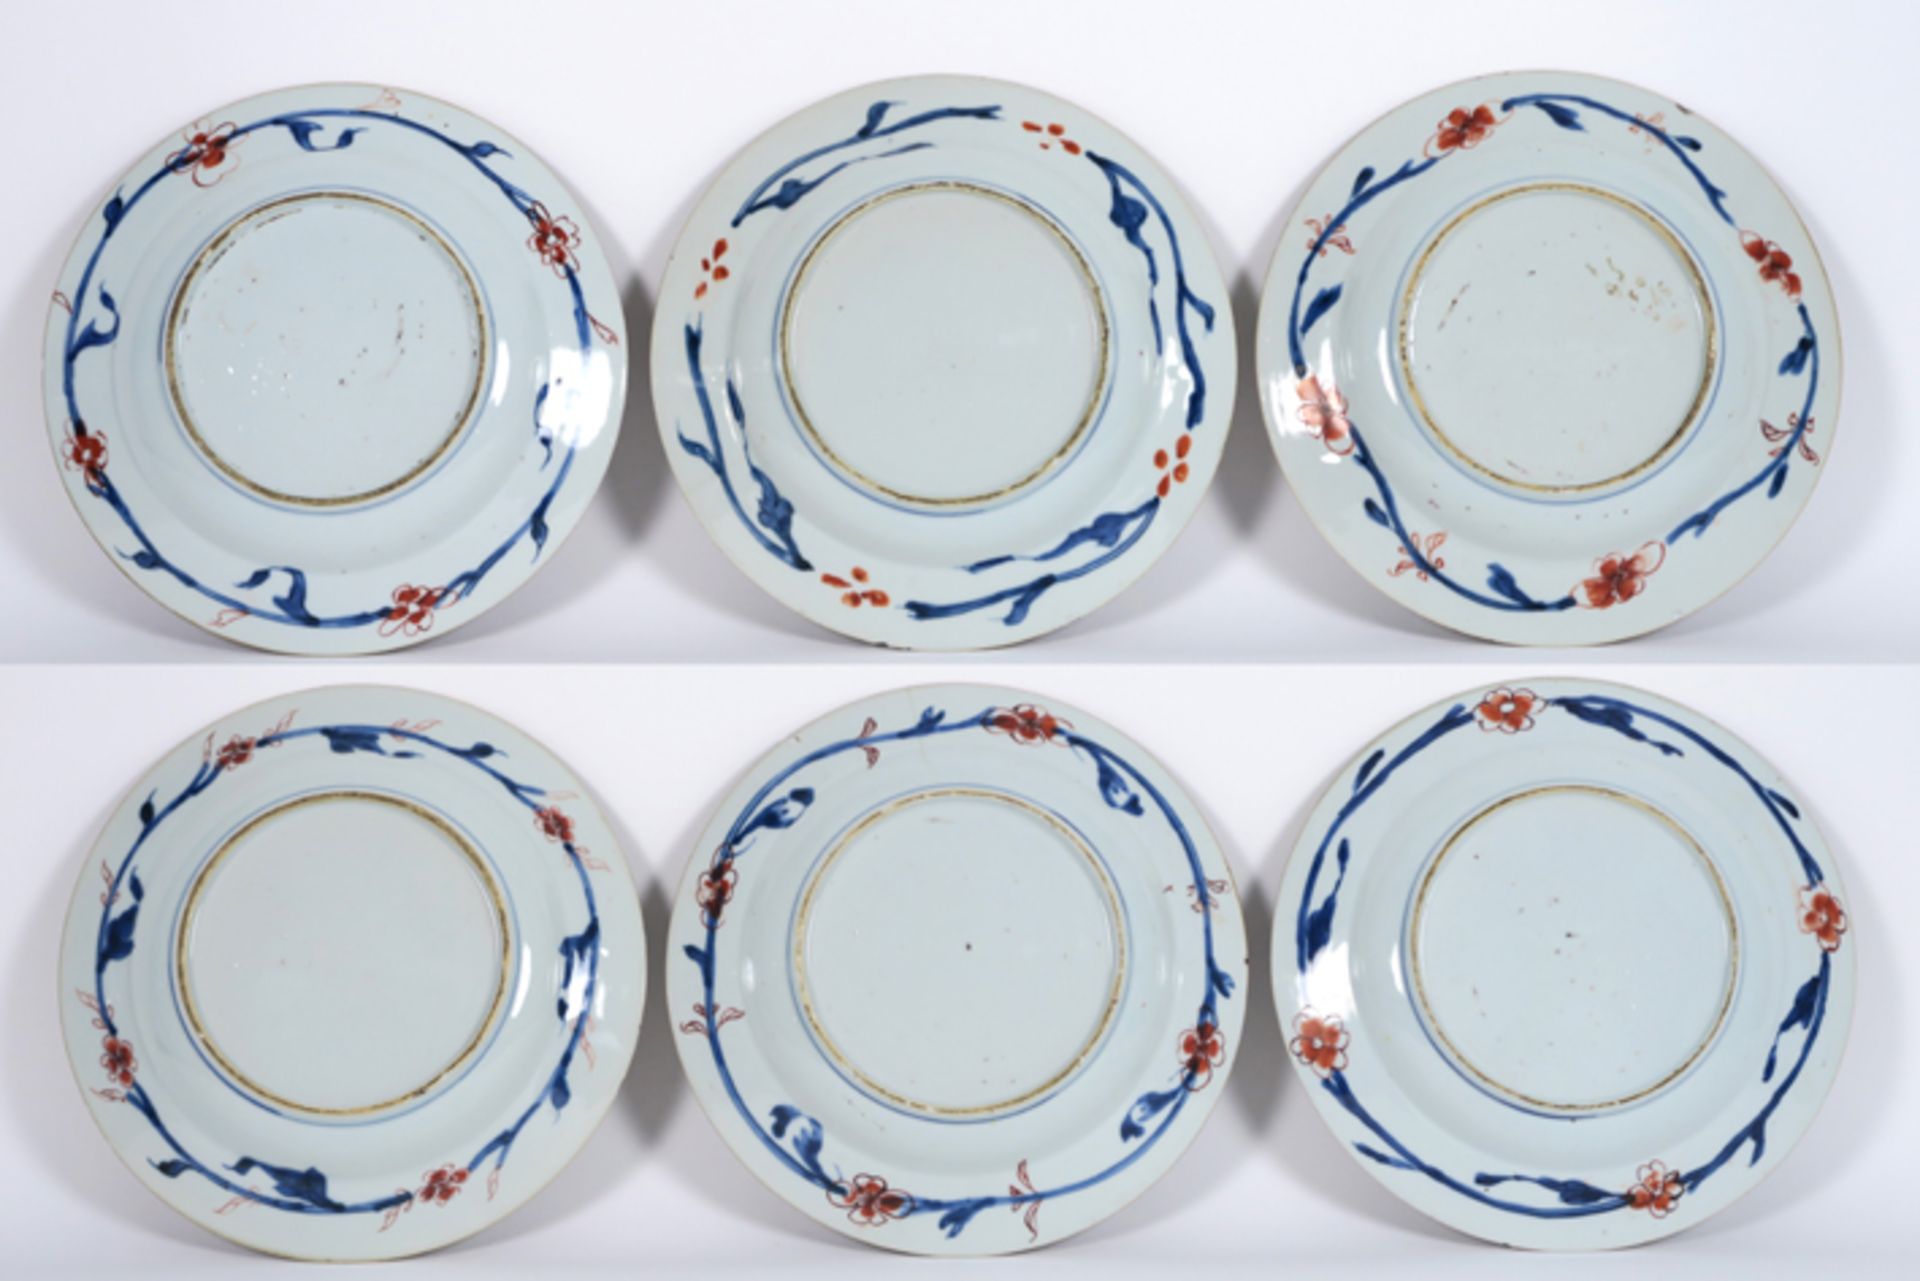 set of six 18th Cent. Chinese plates in porcelain with 'Famille Rose' decor - - [...] - Image 2 of 2